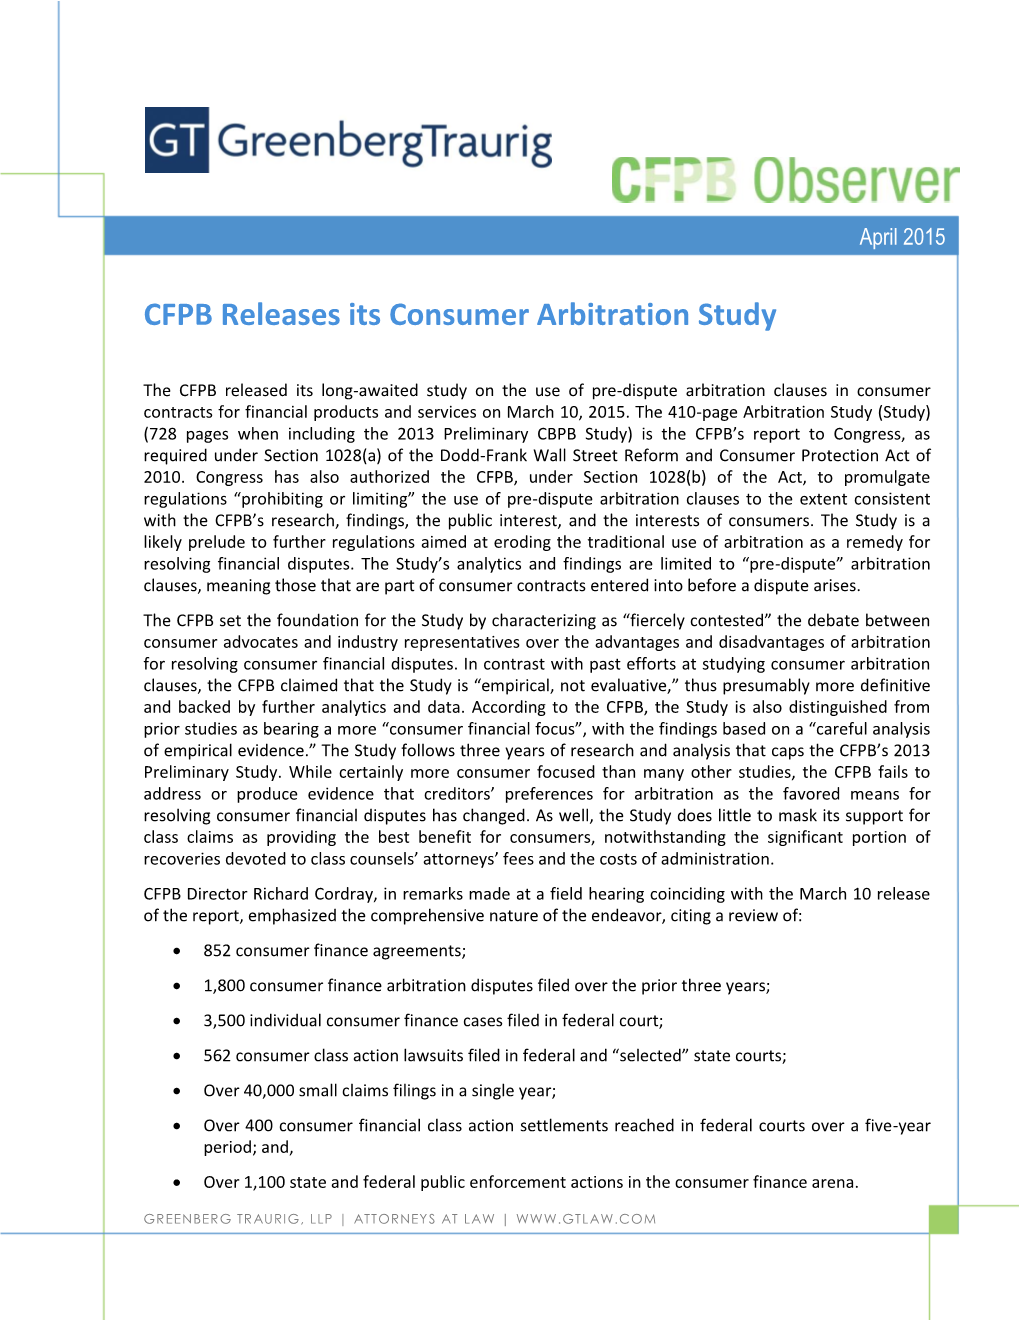 CFPB Releases Its Consumer Arbitration Study